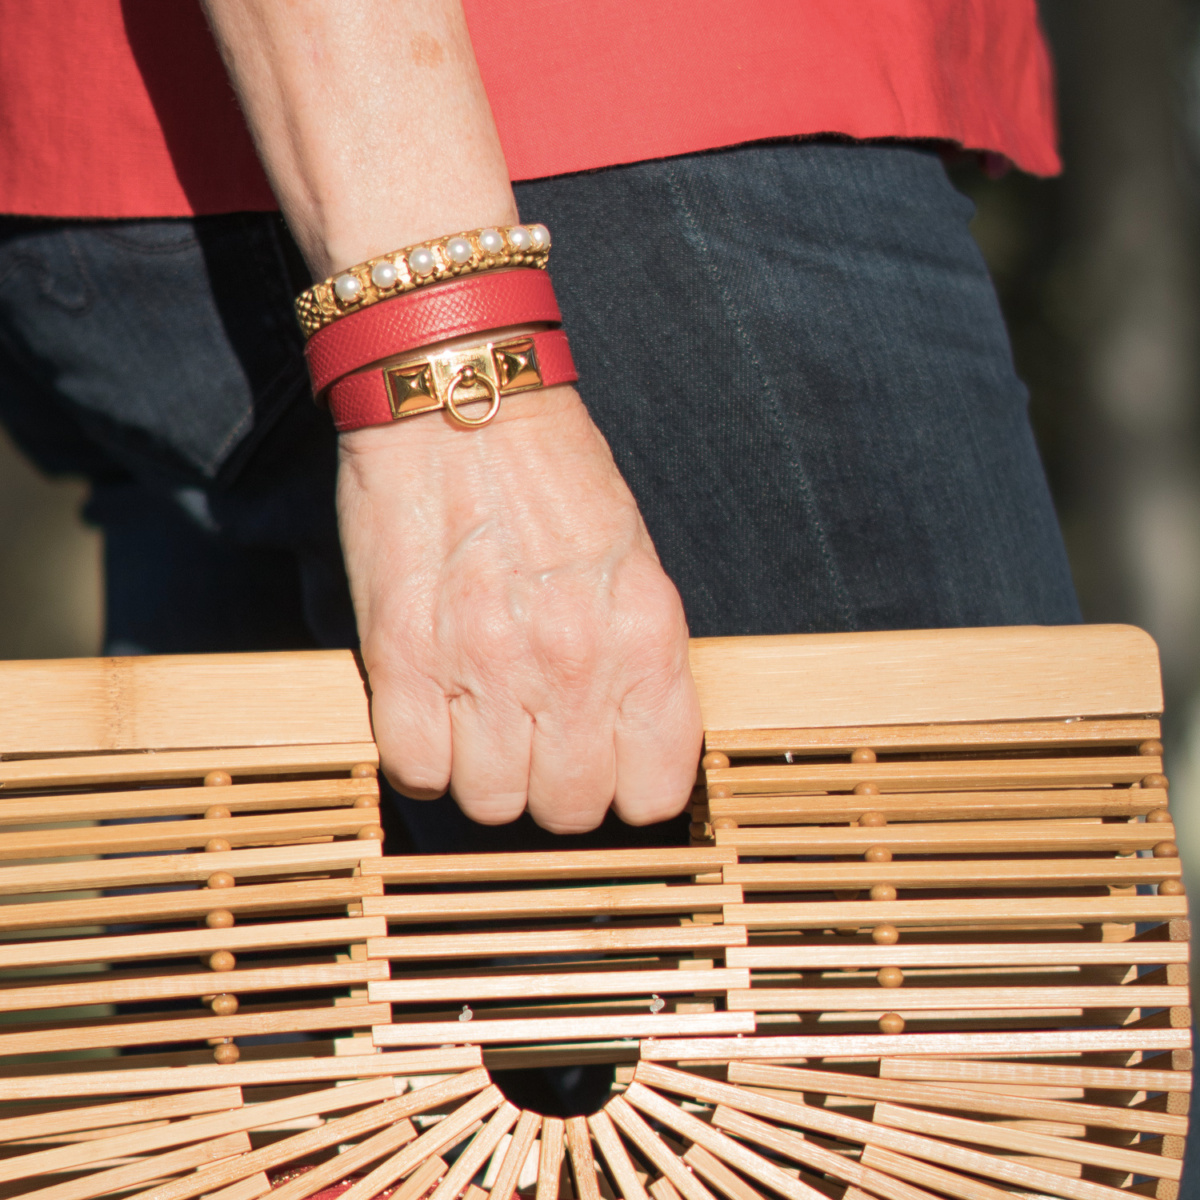 Susan B. of une femme d'un certain age wears Hermes leather bracelet and French Kande pearl studded cuff.